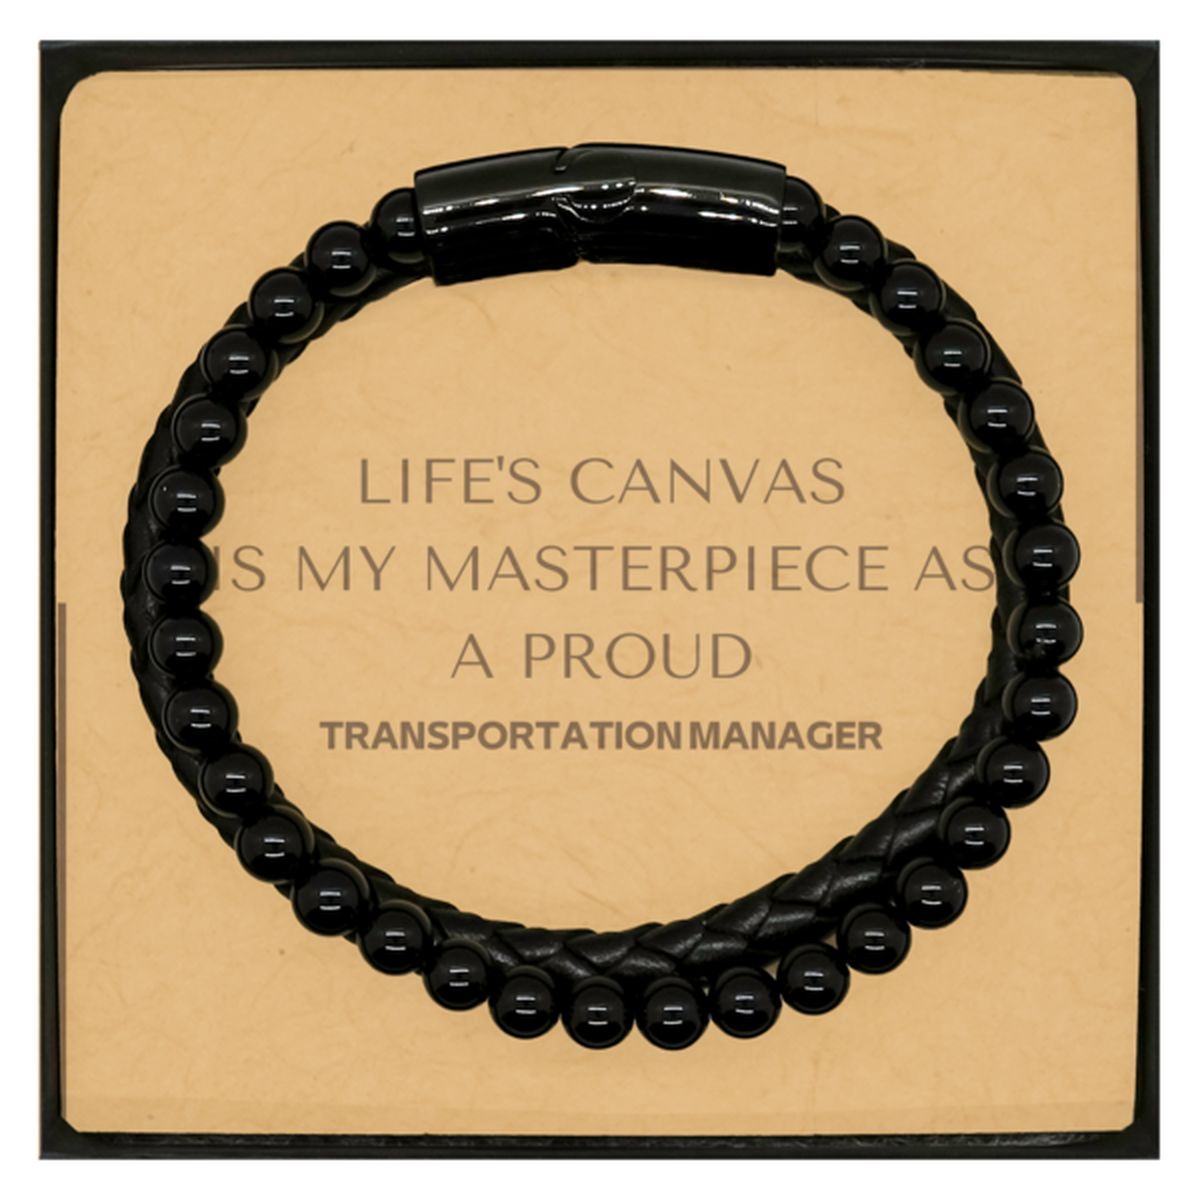 Proud Transportation Manager Gifts, Life's canvas is my masterpiece, Epic Birthday Christmas Unique Stone Leather Bracelets For Transportation Manager, Coworkers, Men, Women, Friends